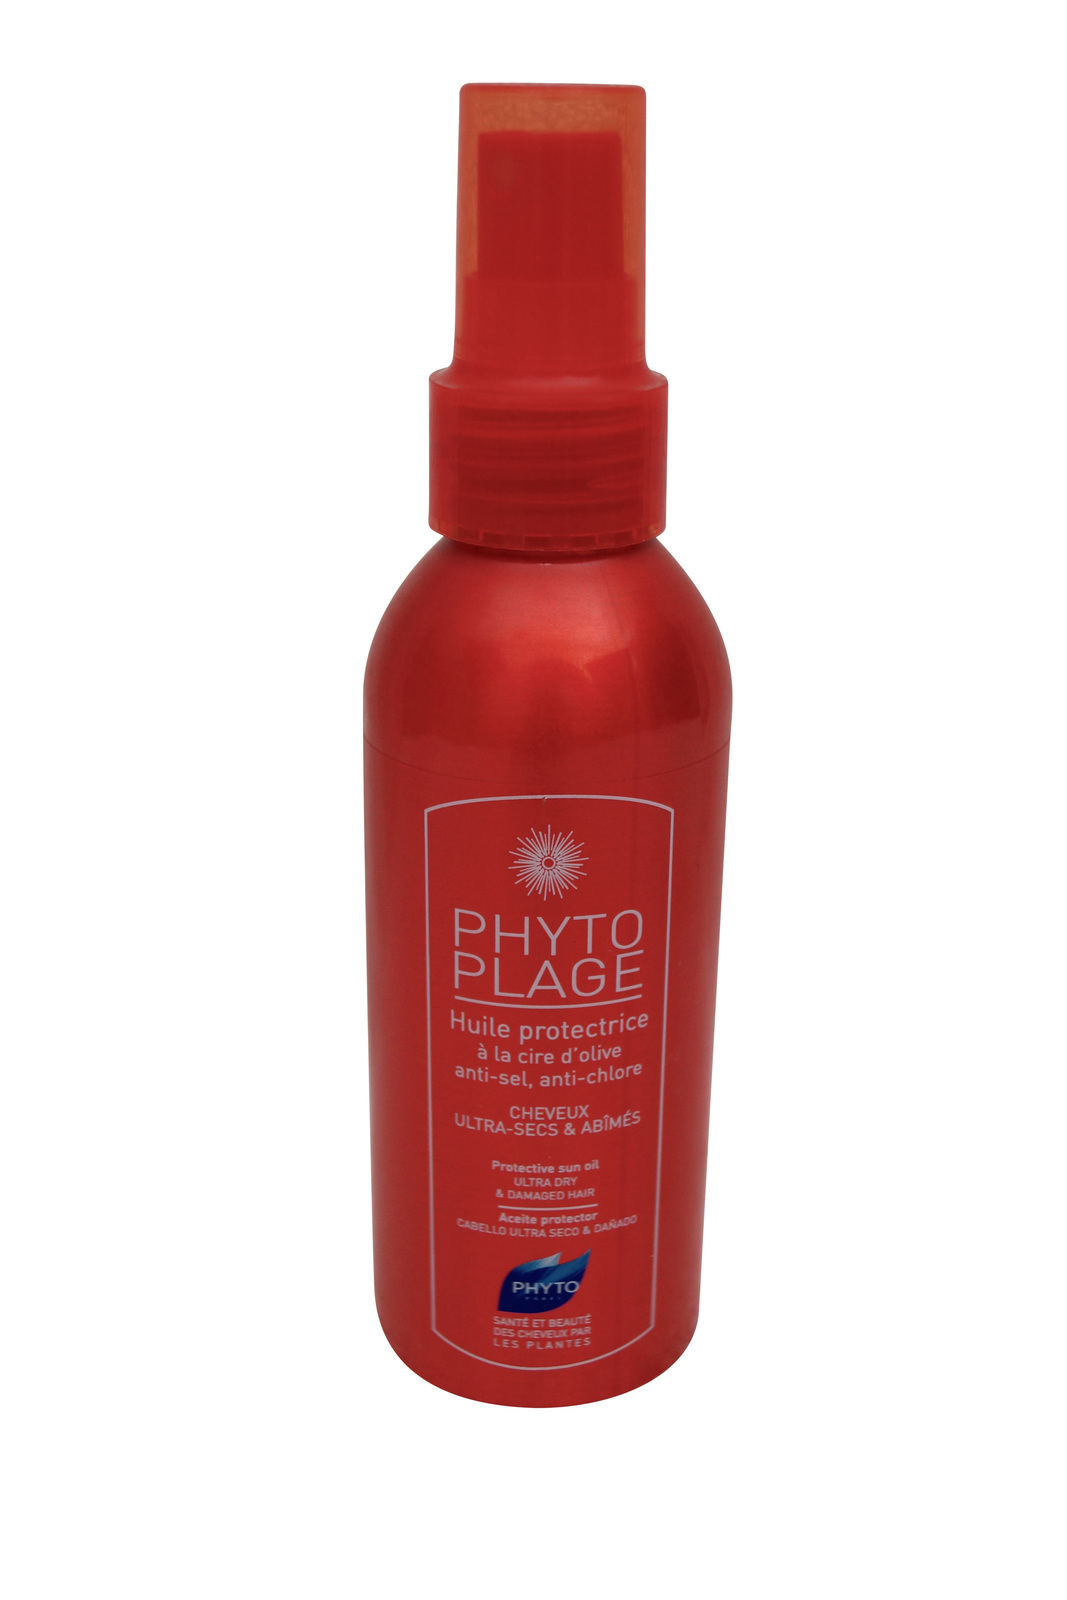 Phyto Plage Protective Hair Oil for Dry Hair 3.3oz. - $15.84